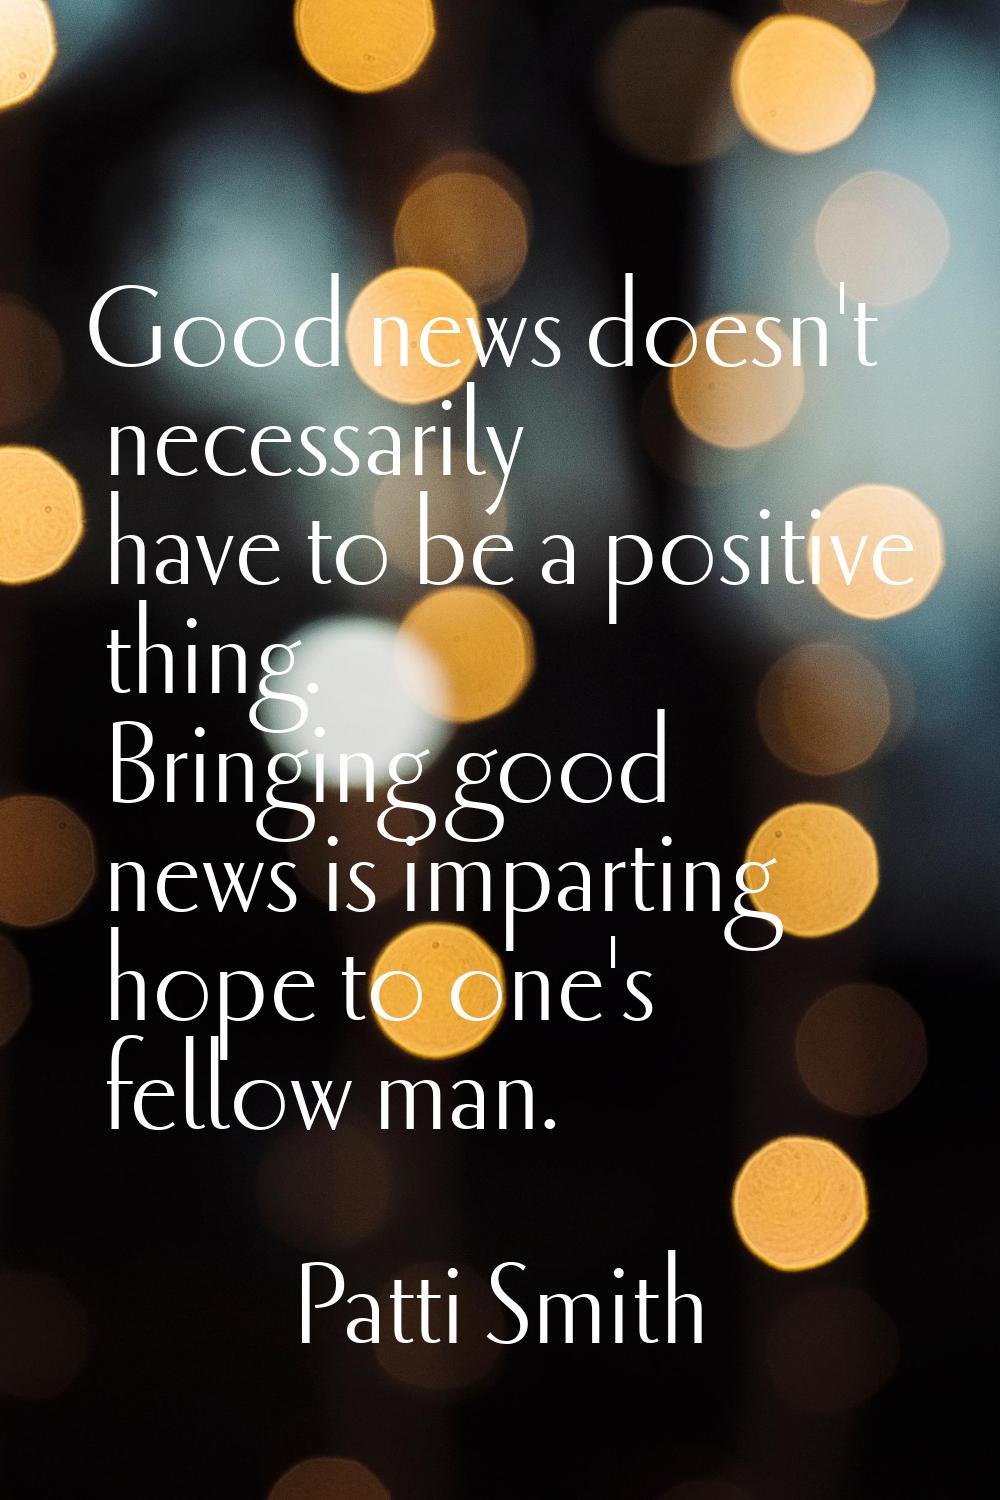 Good news doesn't necessarily have to be a positive thing. Bringing good news is imparting hope to 